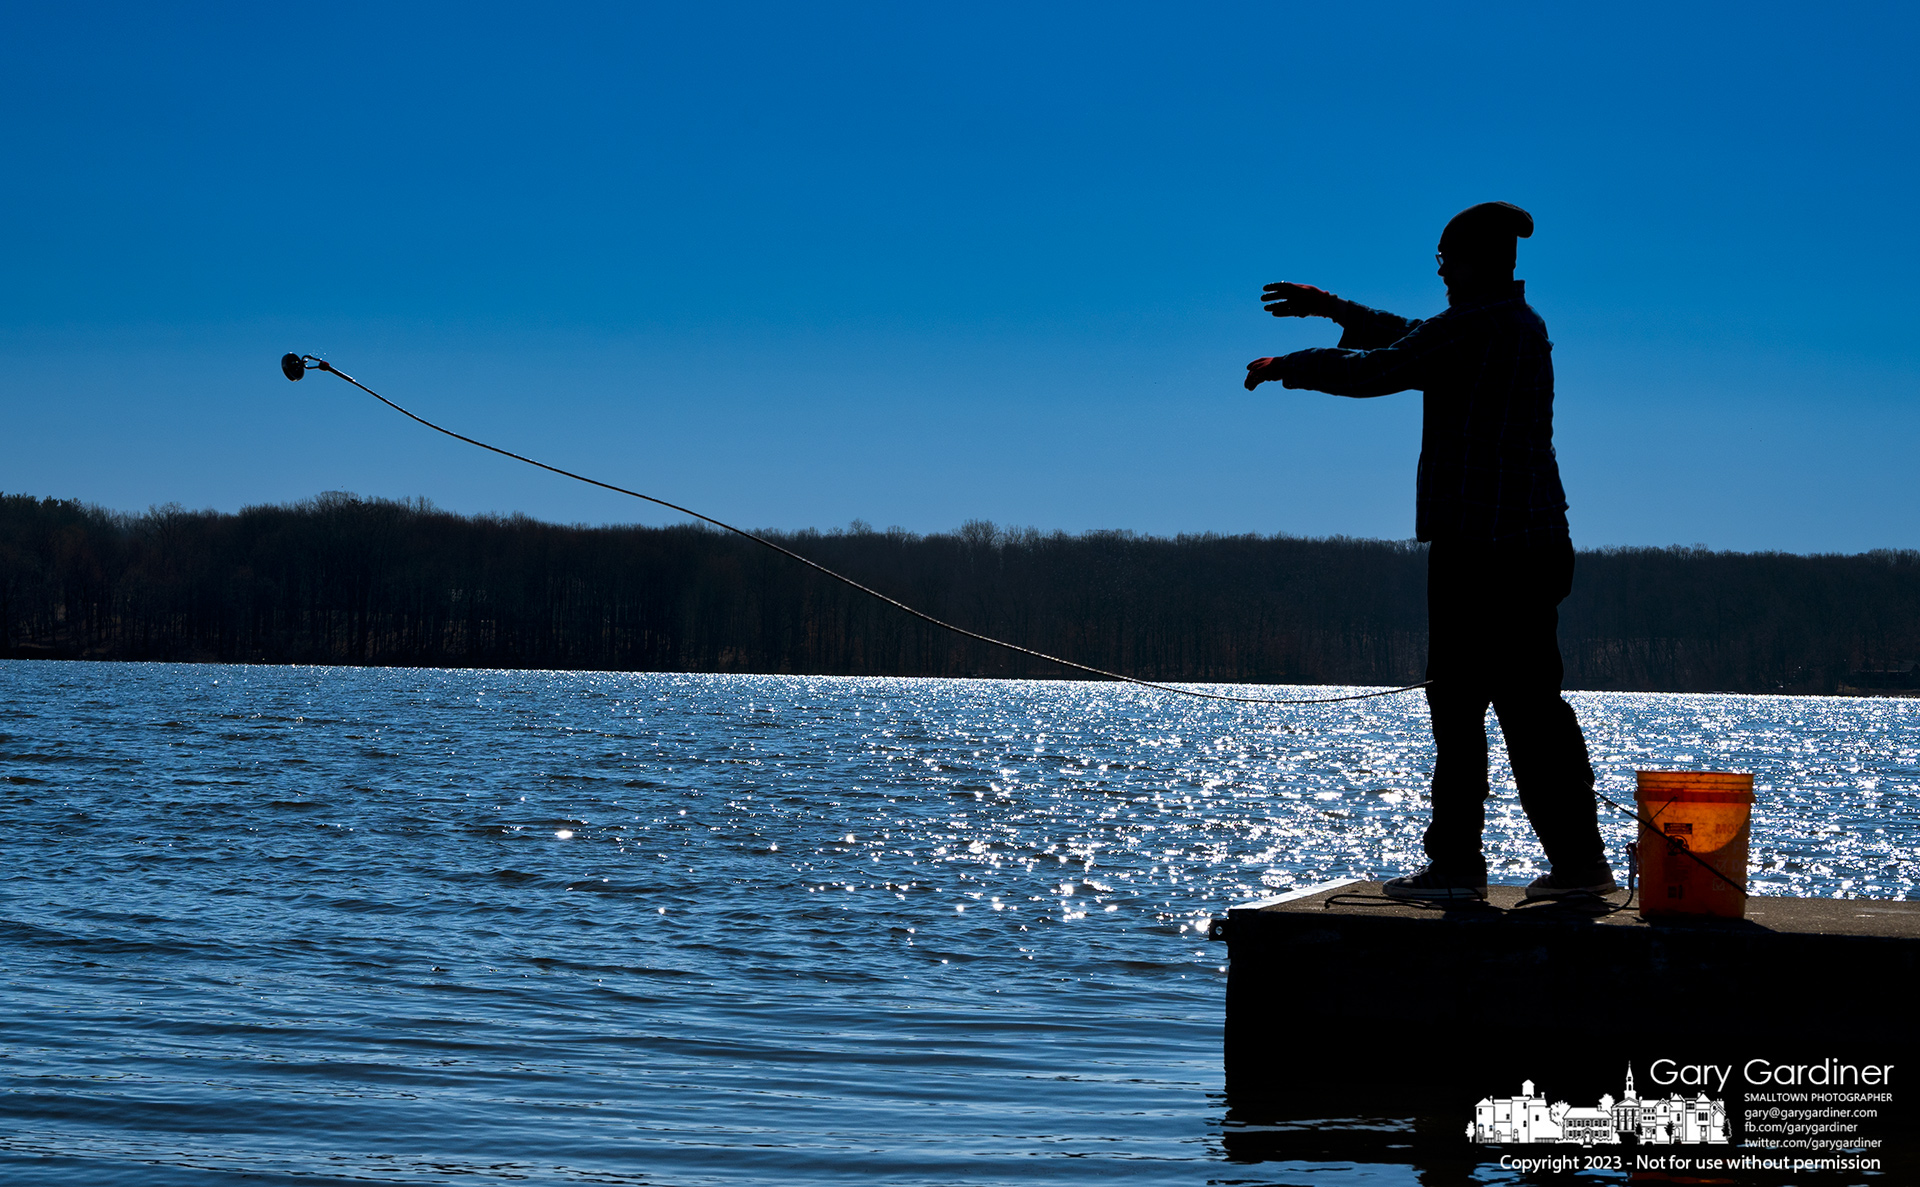 A magnet fisherman tosses his best magnet into Hoover Reservoir from the concrete jetty at the Walnut Street boat ramp only to have it and a second magnet get caught on rocks forcing him to cut the ropes leaving the magnets until the water level is lower for retrieval. My Final Photo for March 20, 2023.